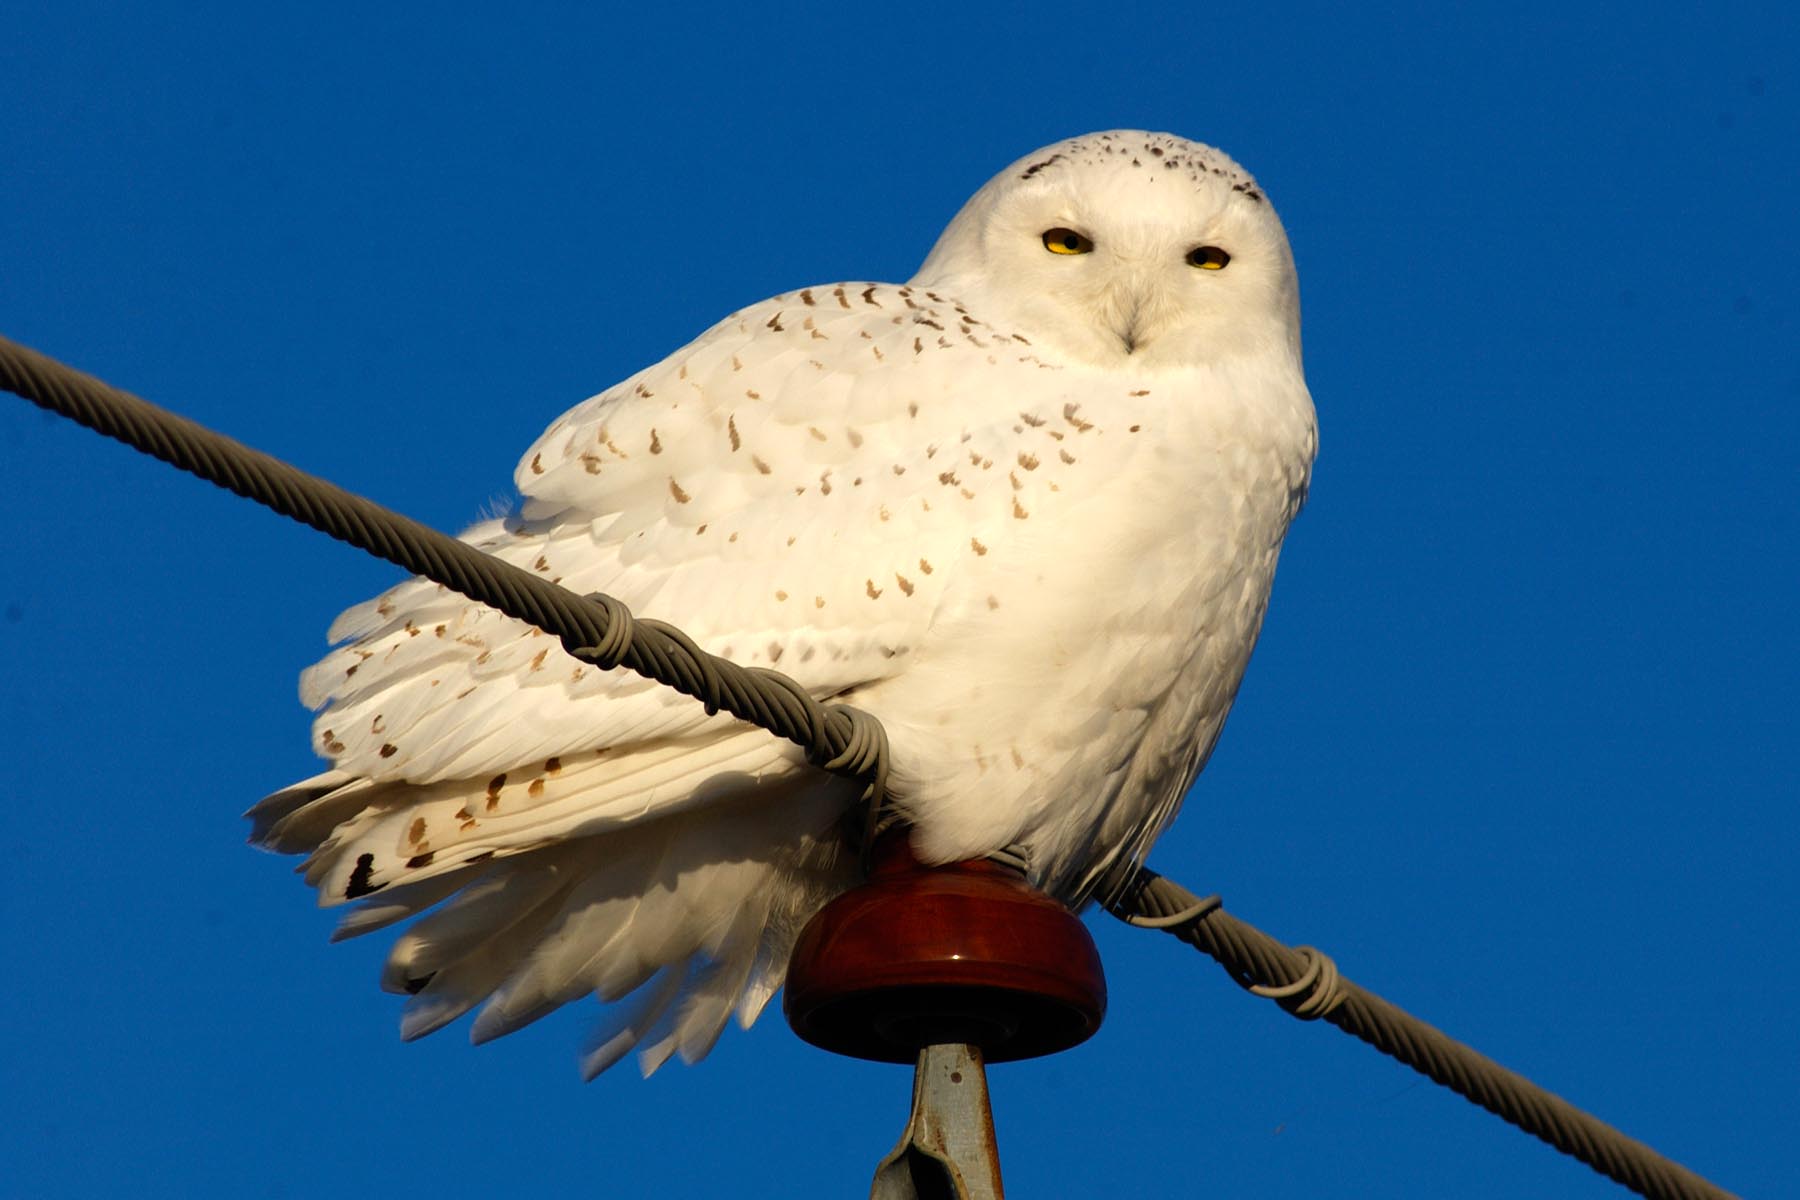 Here's a snowy owl that headed south for the winter—to Missouri. These big Arctic owls have been spotted in previous years as far south as Florida. (PHOTO COURTESY OF THE MISSOURI DEPT. OF CONSERVATION)